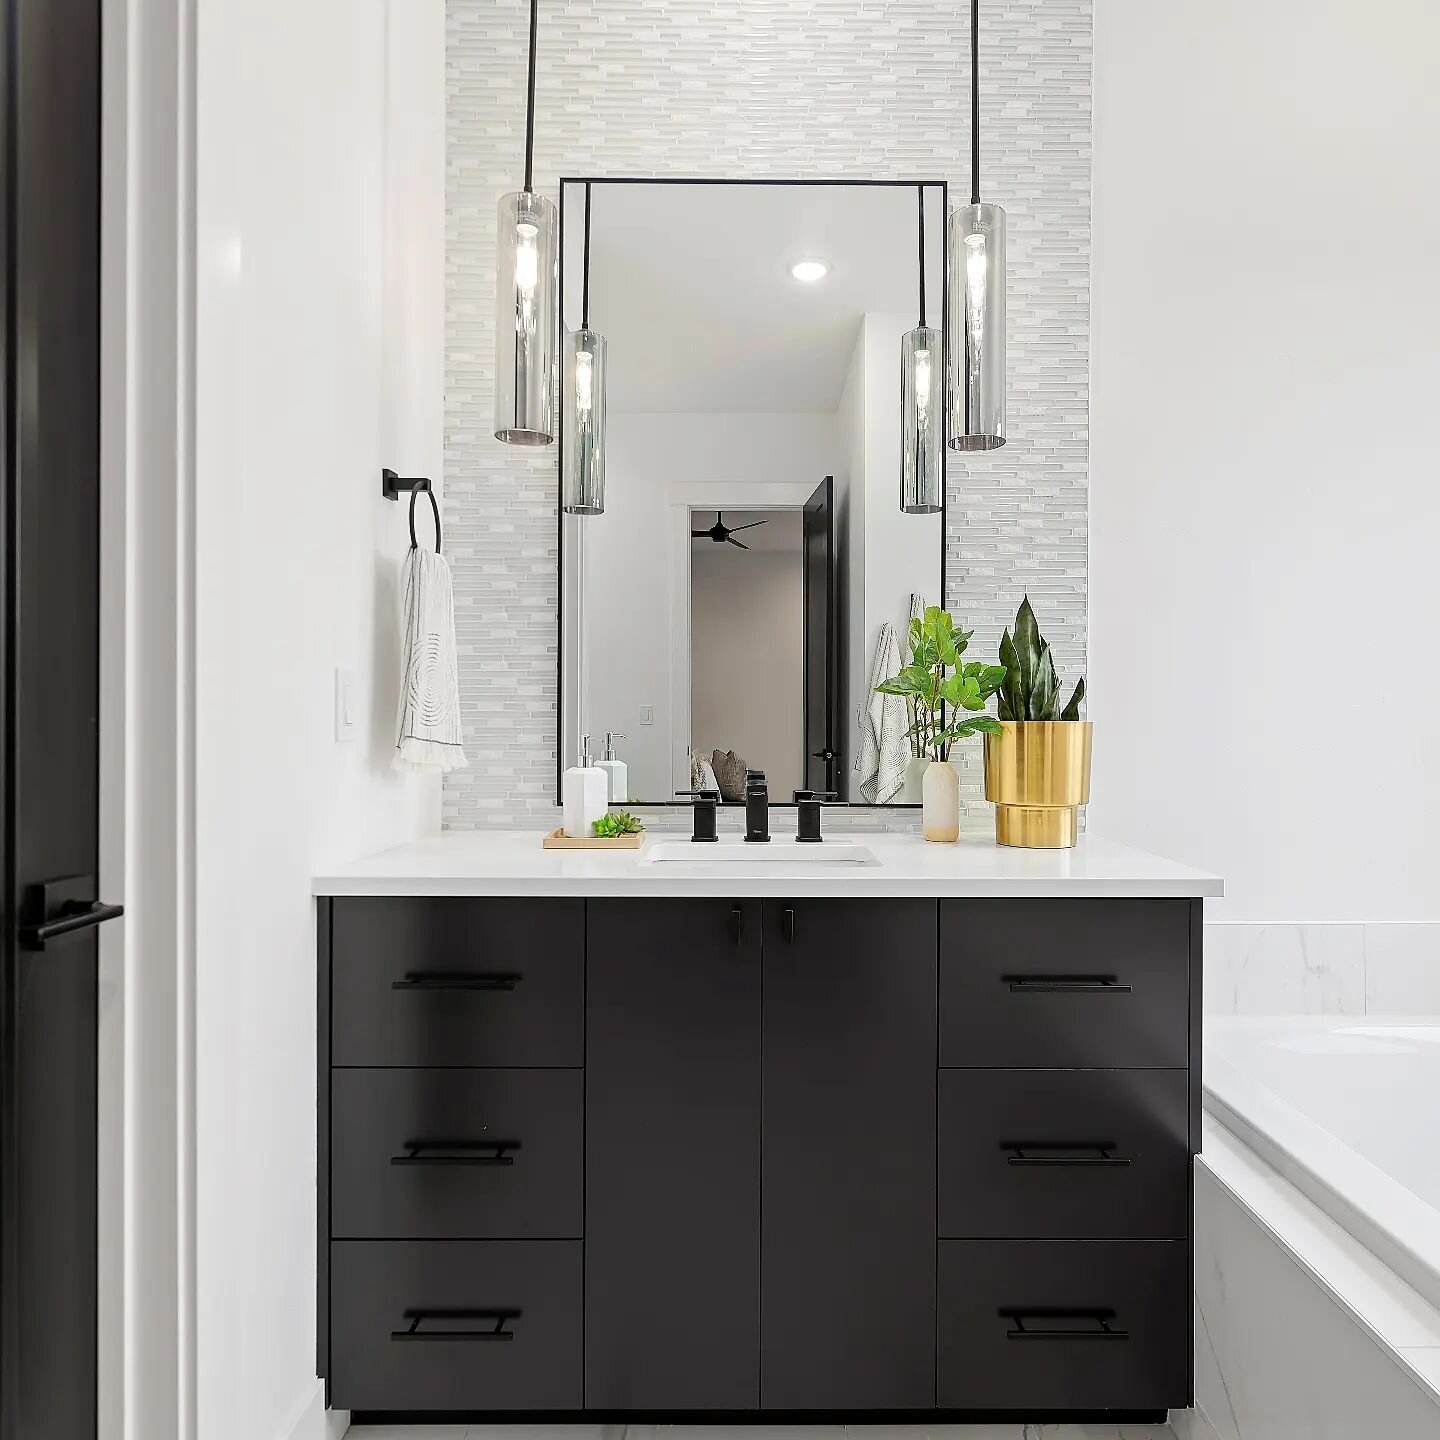 Loving the smoke glass pendant lights, tile backsplash to the ceiling and accent mirror in this primary bathroom. ✨️
.
.
.
.🔨 Design &amp; Build @customhomesbb
. 🛋 Home Decor @sullivanhomesstaging
. 📷 Photography @sunnyskiesmedia
.
.
.
.
.
#interi